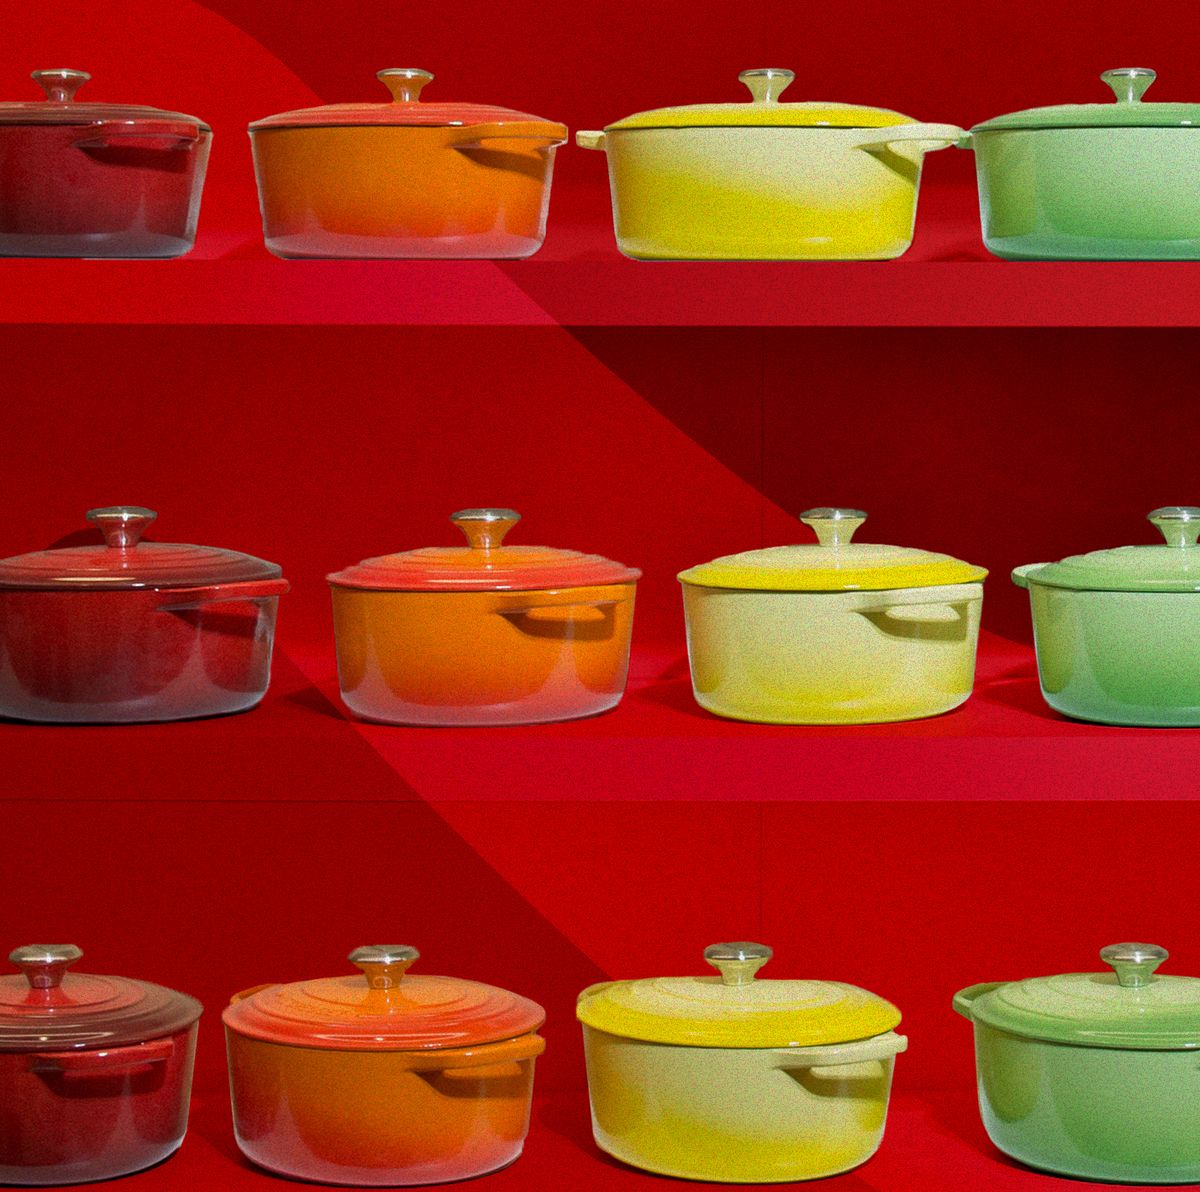 Calling all home cooks: Save $110 on the Le Creuset dutch oven you've  always wanted and more